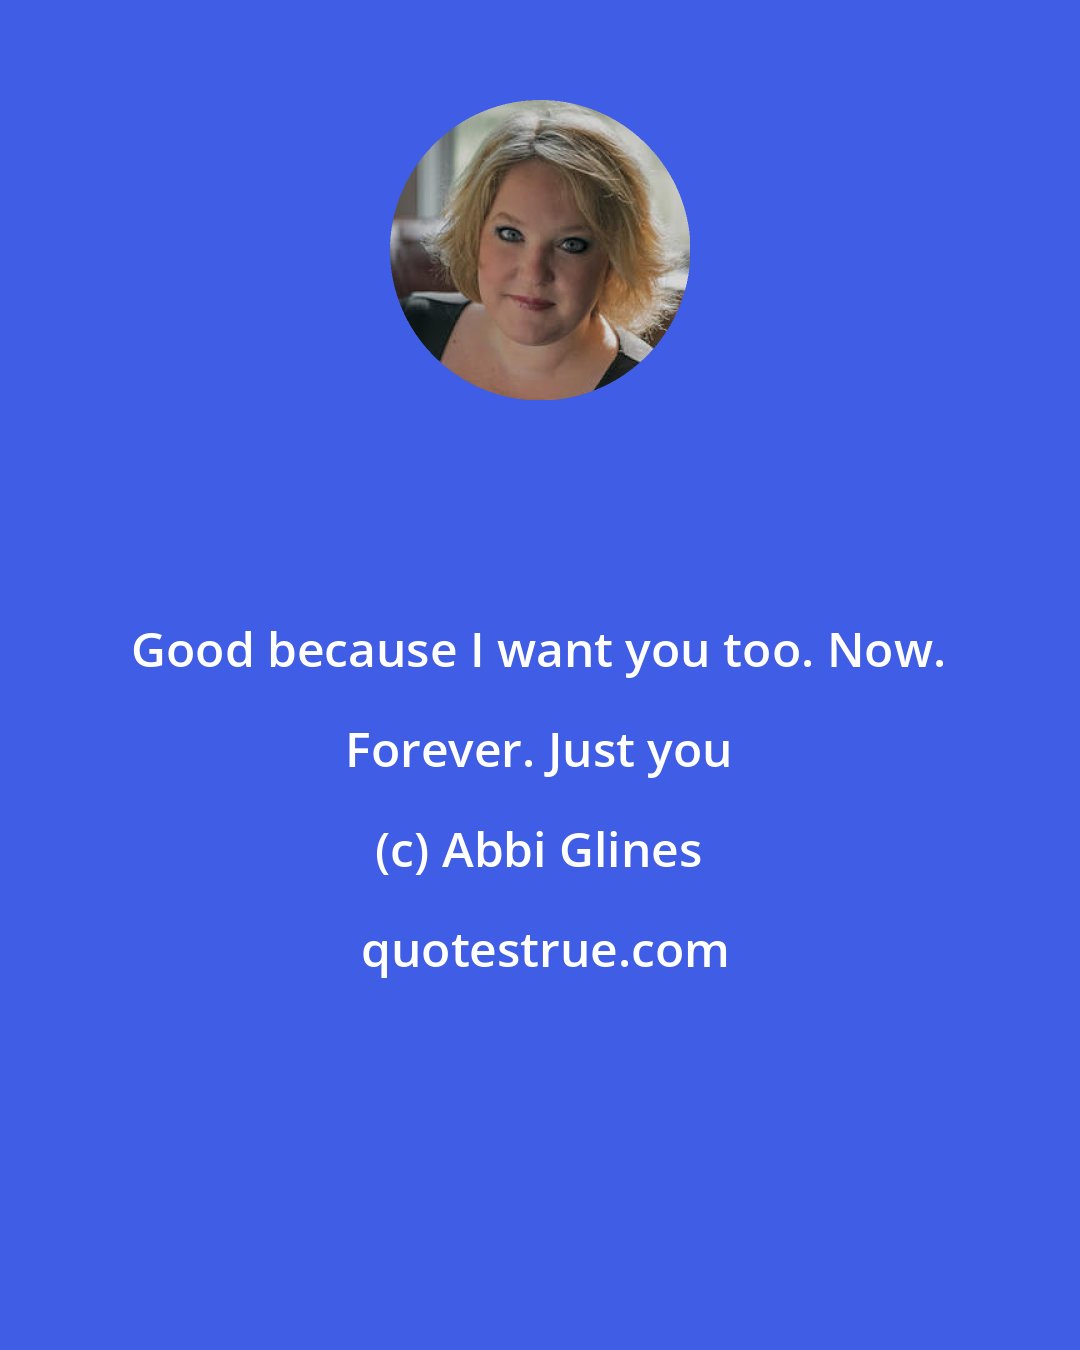 Abbi Glines: Good because I want you too. Now. Forever. Just you